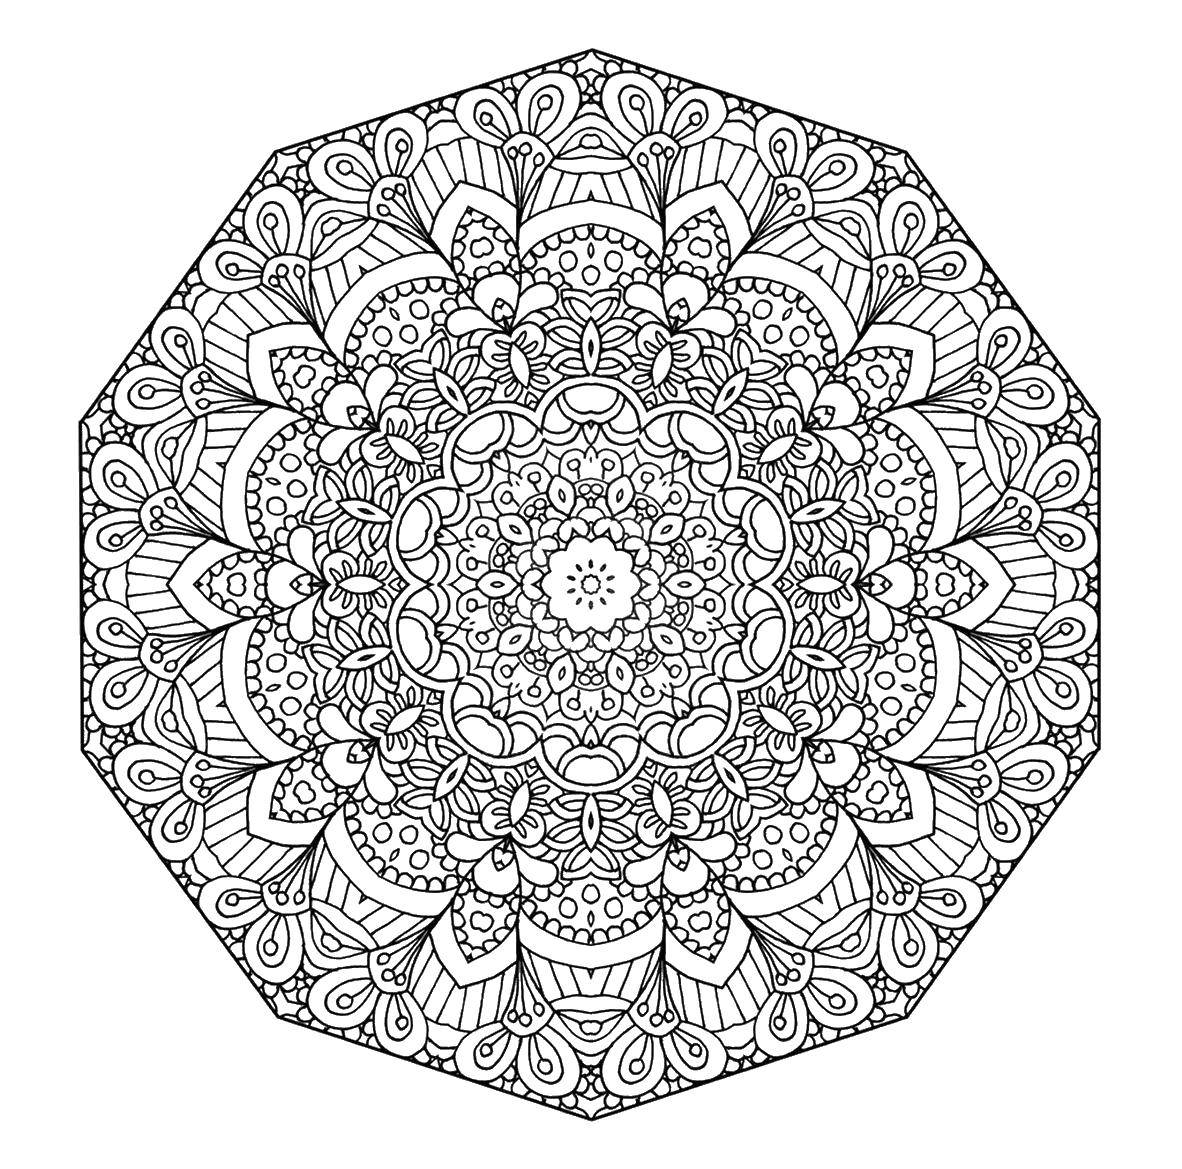 Coloring Patterned polygon. Category patterns. Tags:  Patterns, geometric.